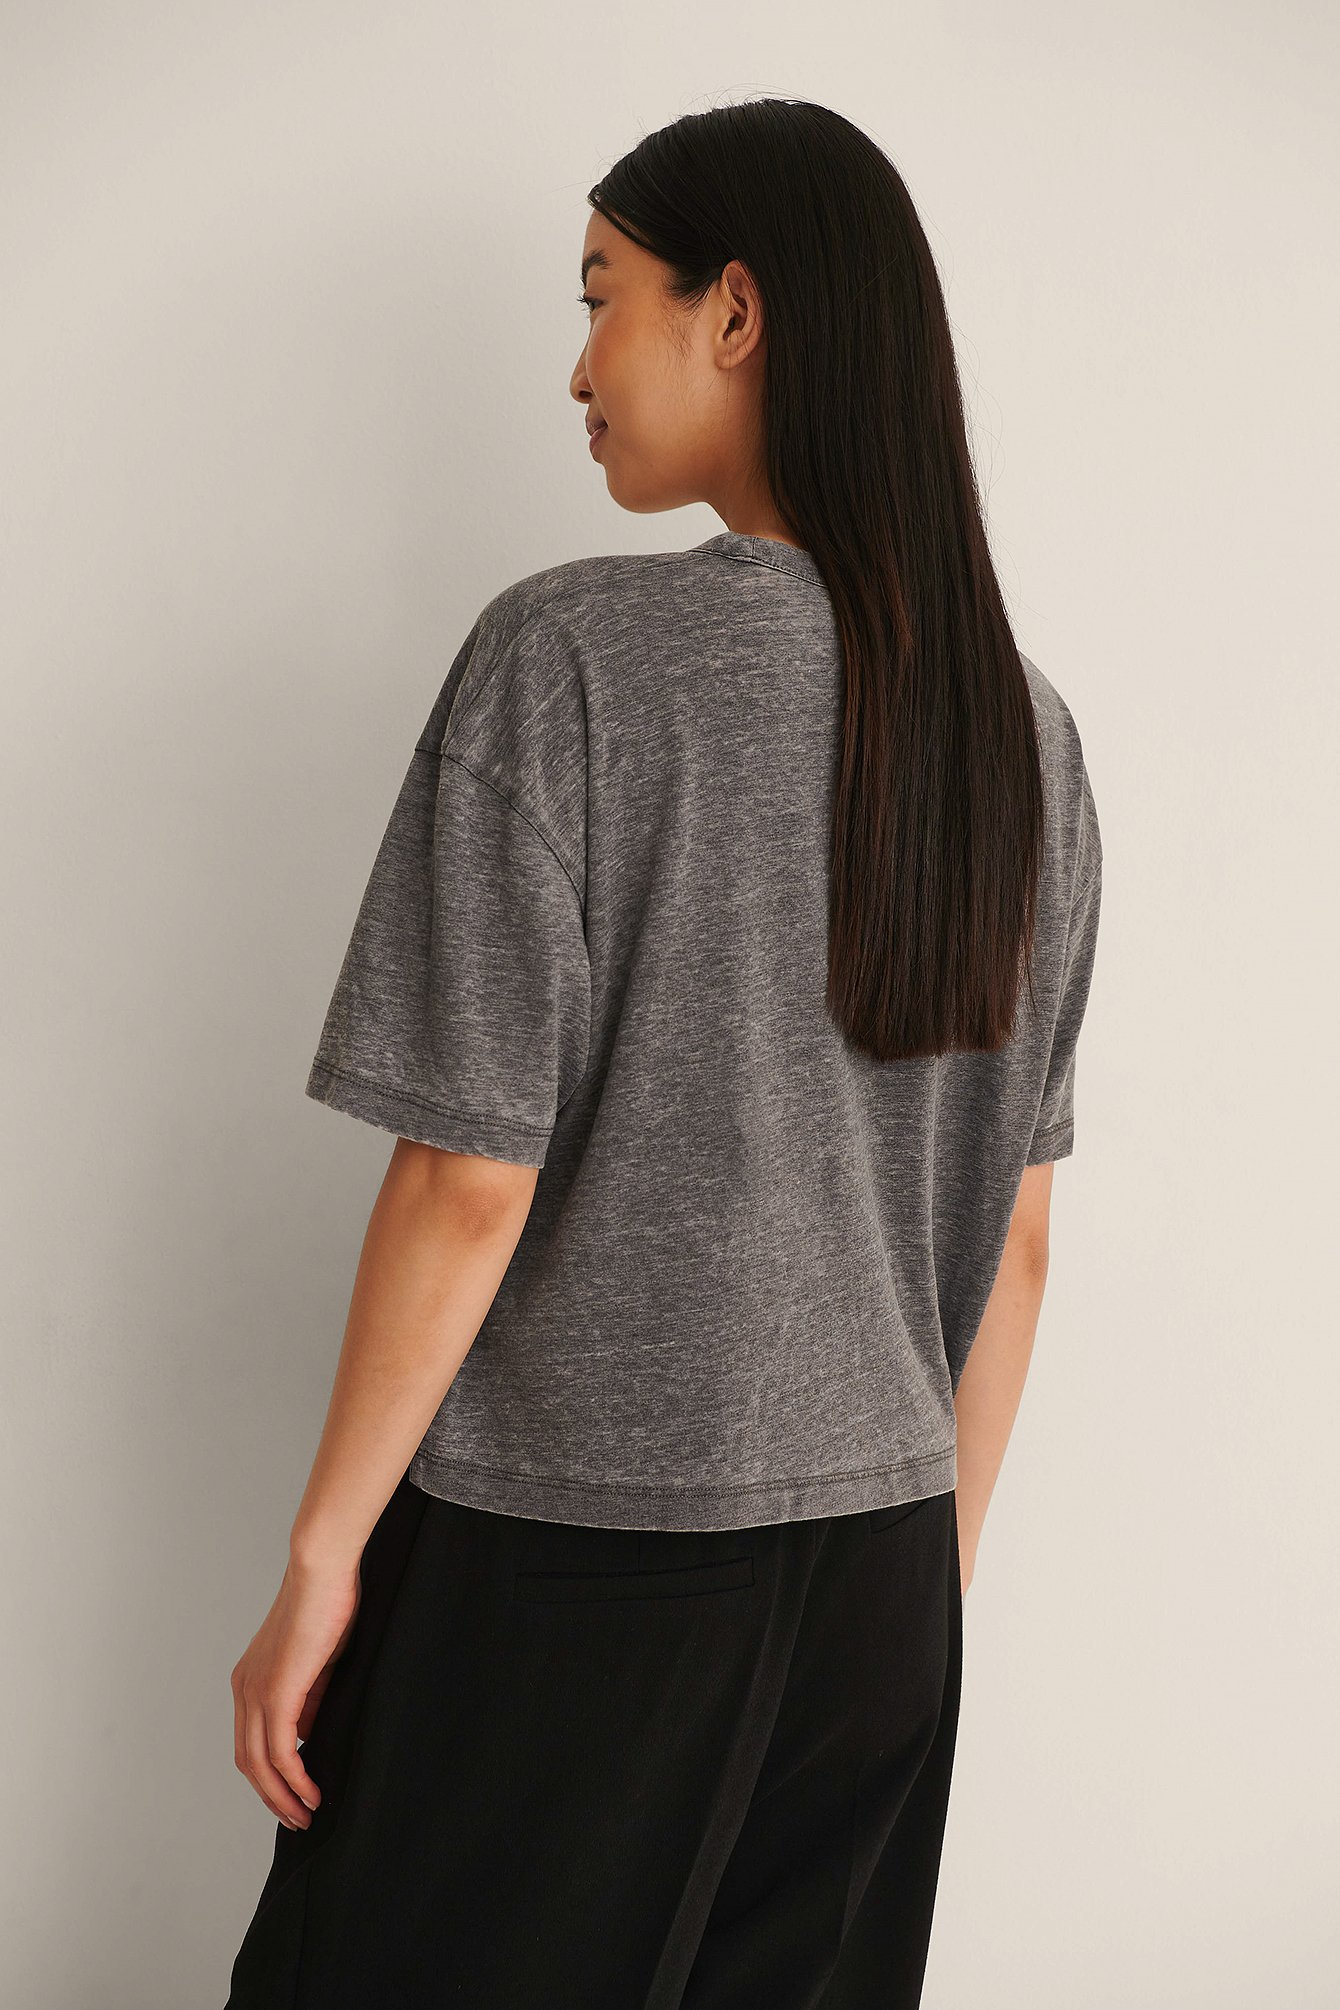 CK Black Burn Out Oversized Tee